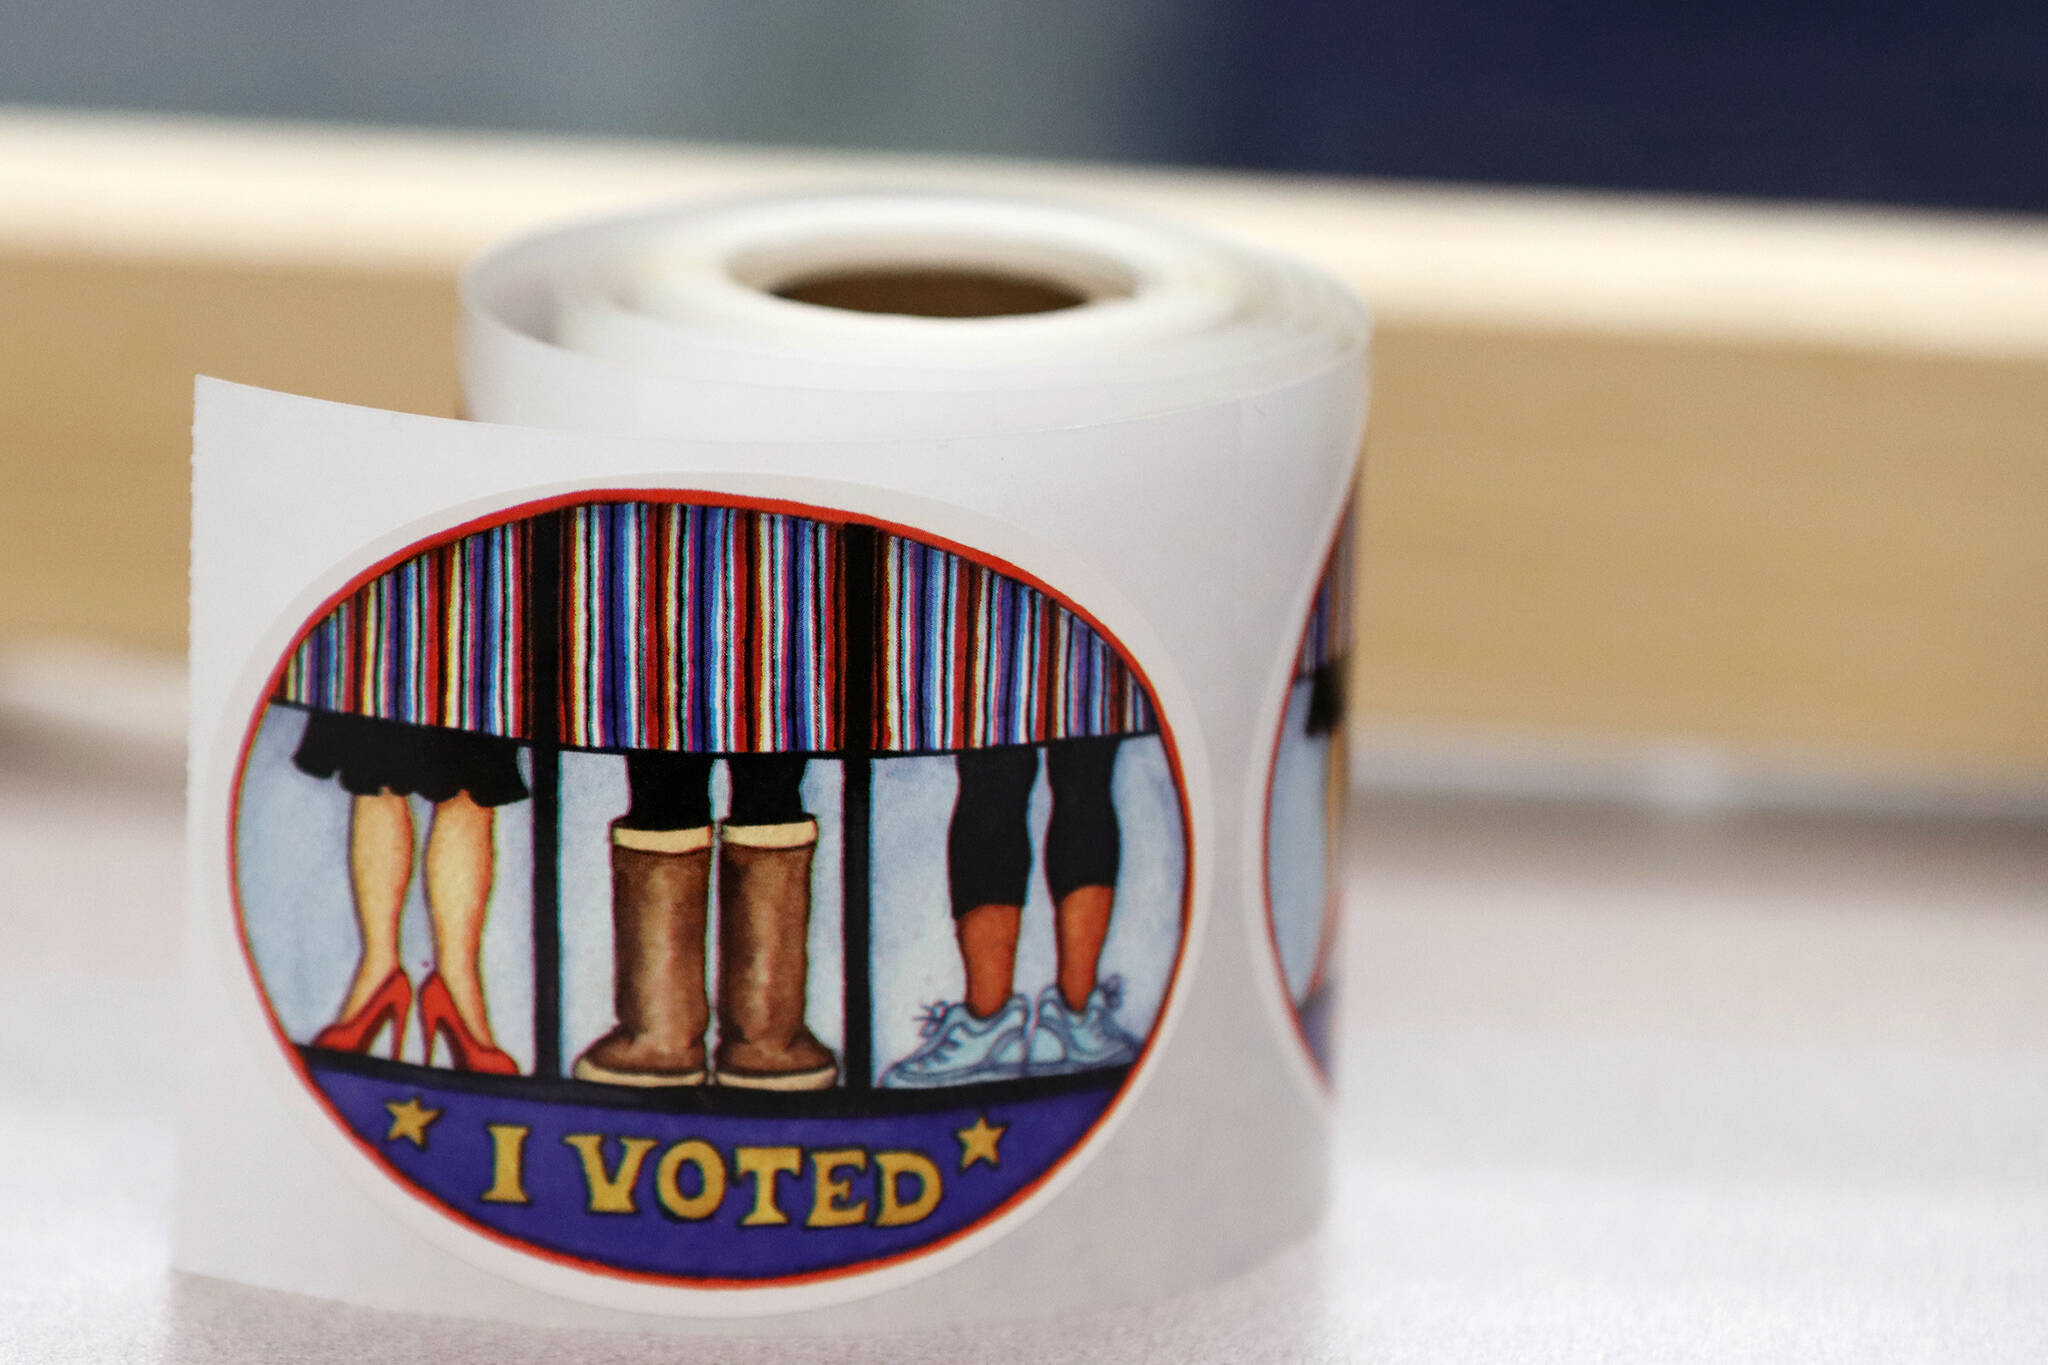 A roll of I voted stickers await voters on Saturday at the Alaska Division of Elections office in Juneau. On Saturday, which was also special primary election day, the Alaska Supreme Court reversed a ruling that would have delayed certification of the special election,.(Ben Hohenstatt / Juneau Empire)